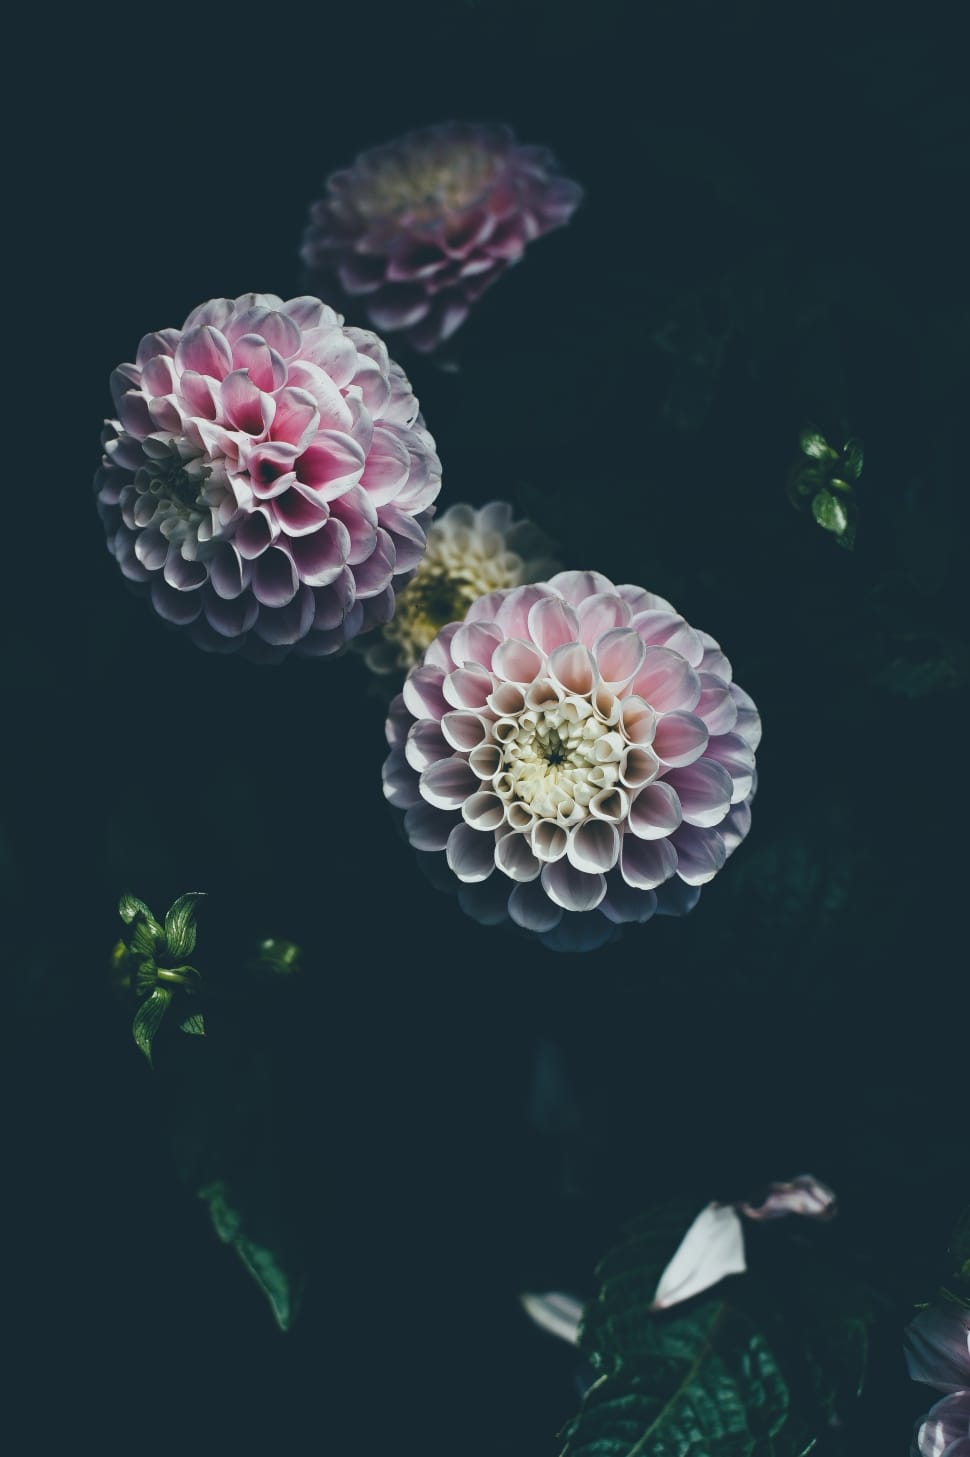 pink-and-white ball dahlias close up photography preview